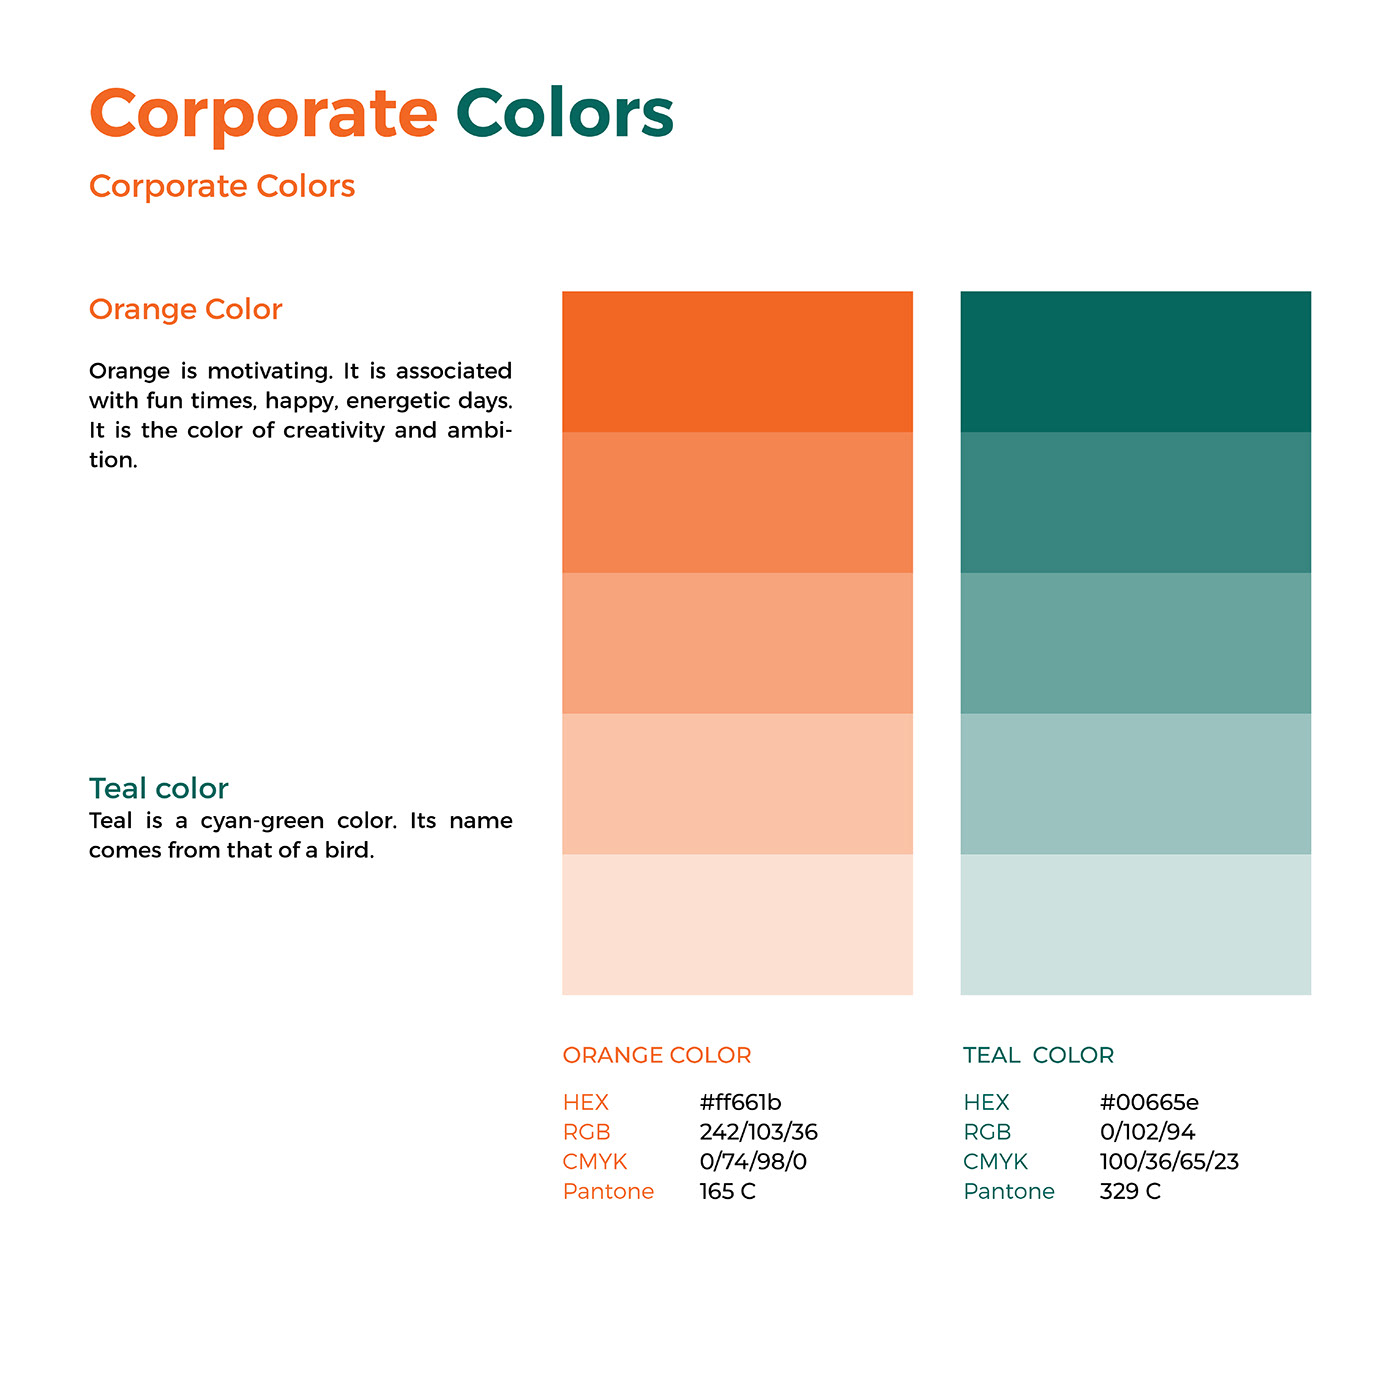 Corporate colors
